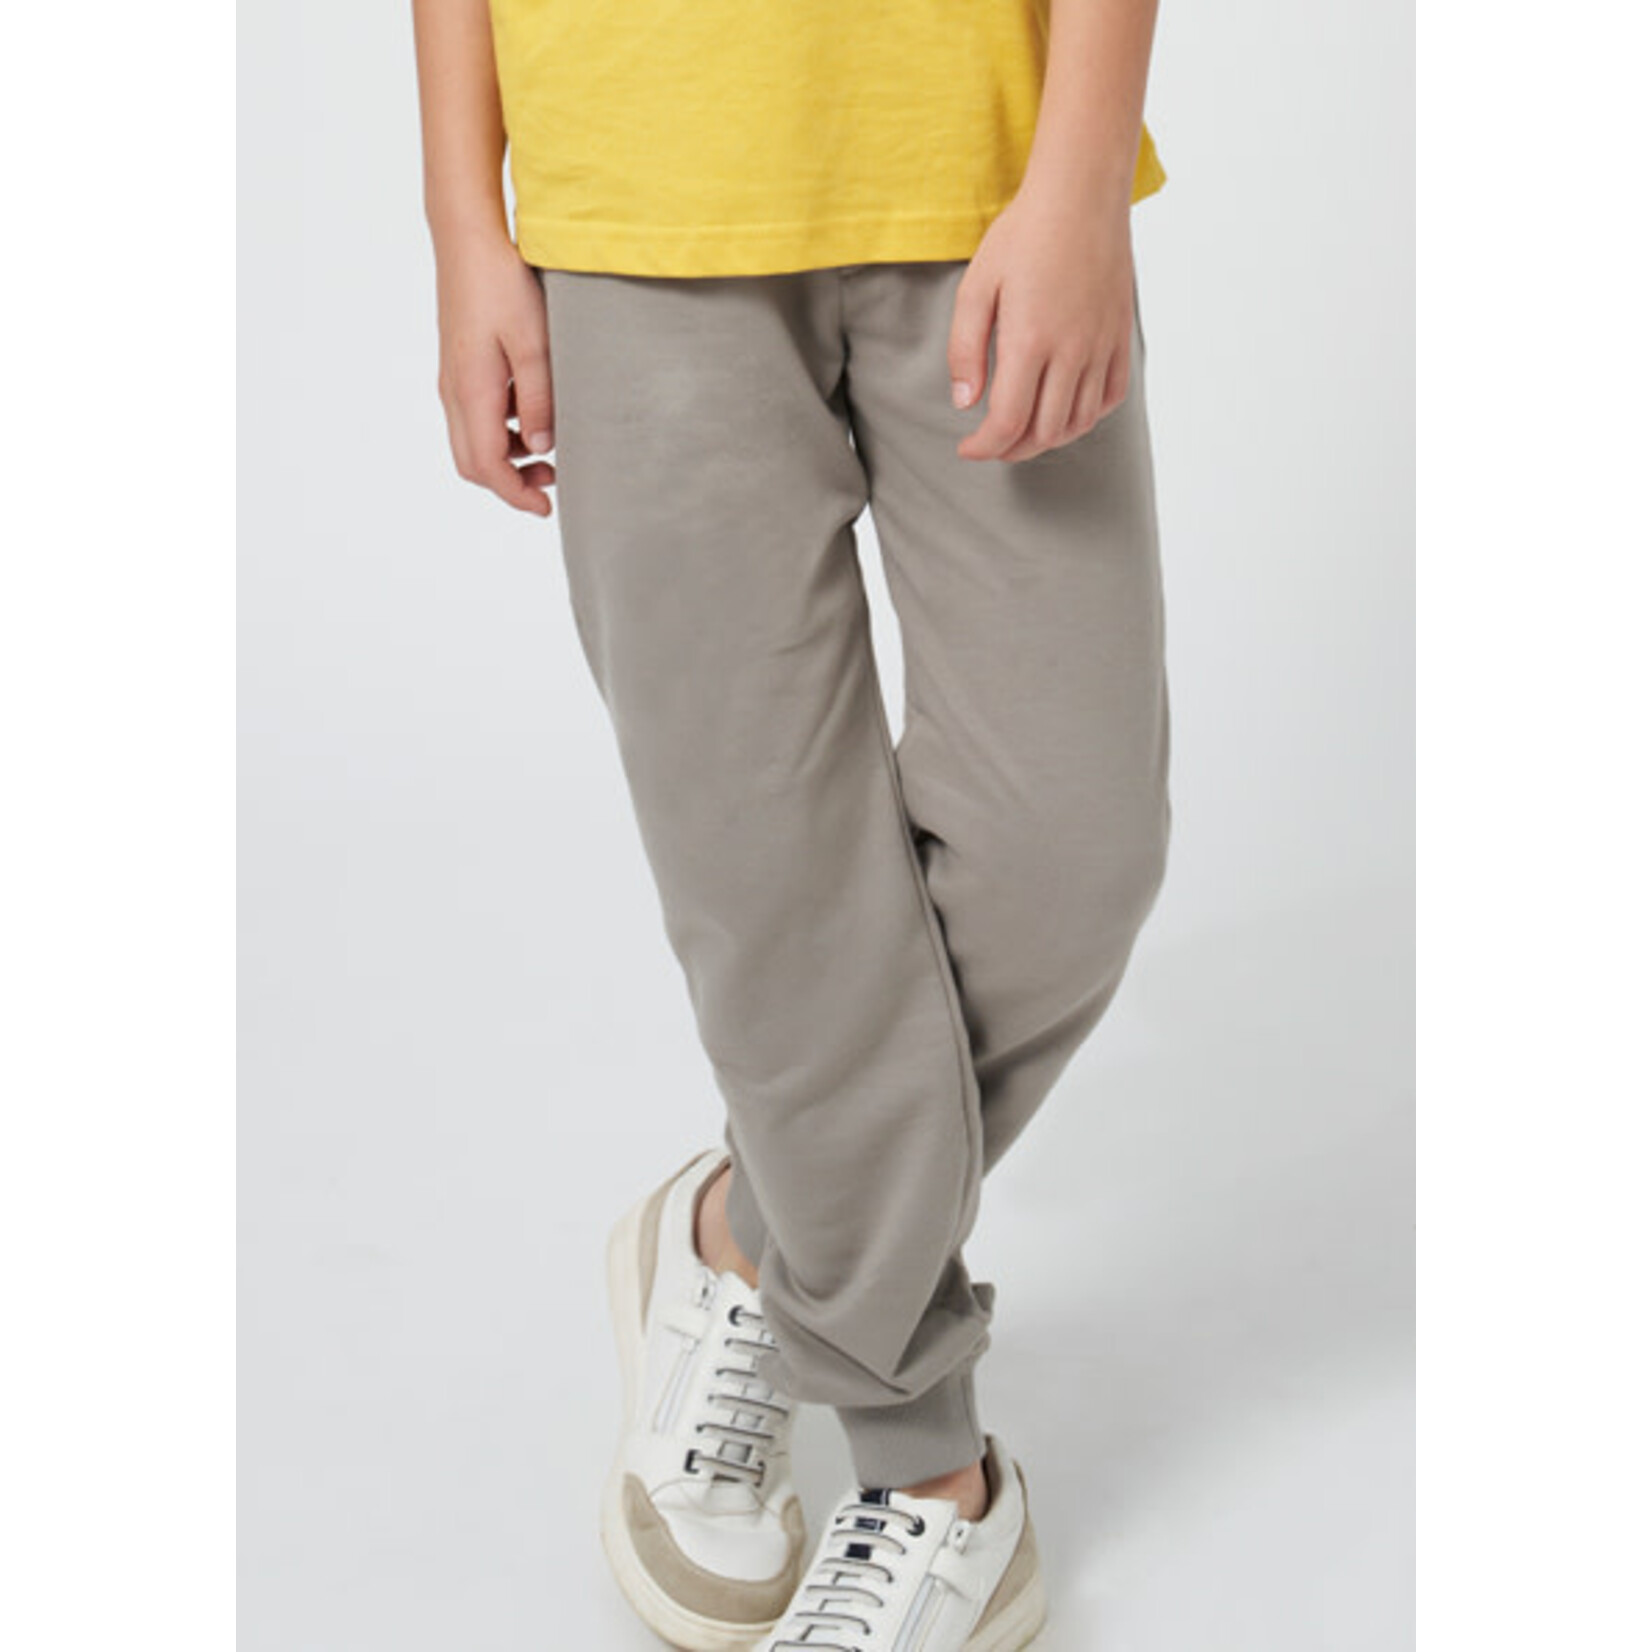 MAYORAL TWEEN FRENCH TERRY BOYS JOGGERS